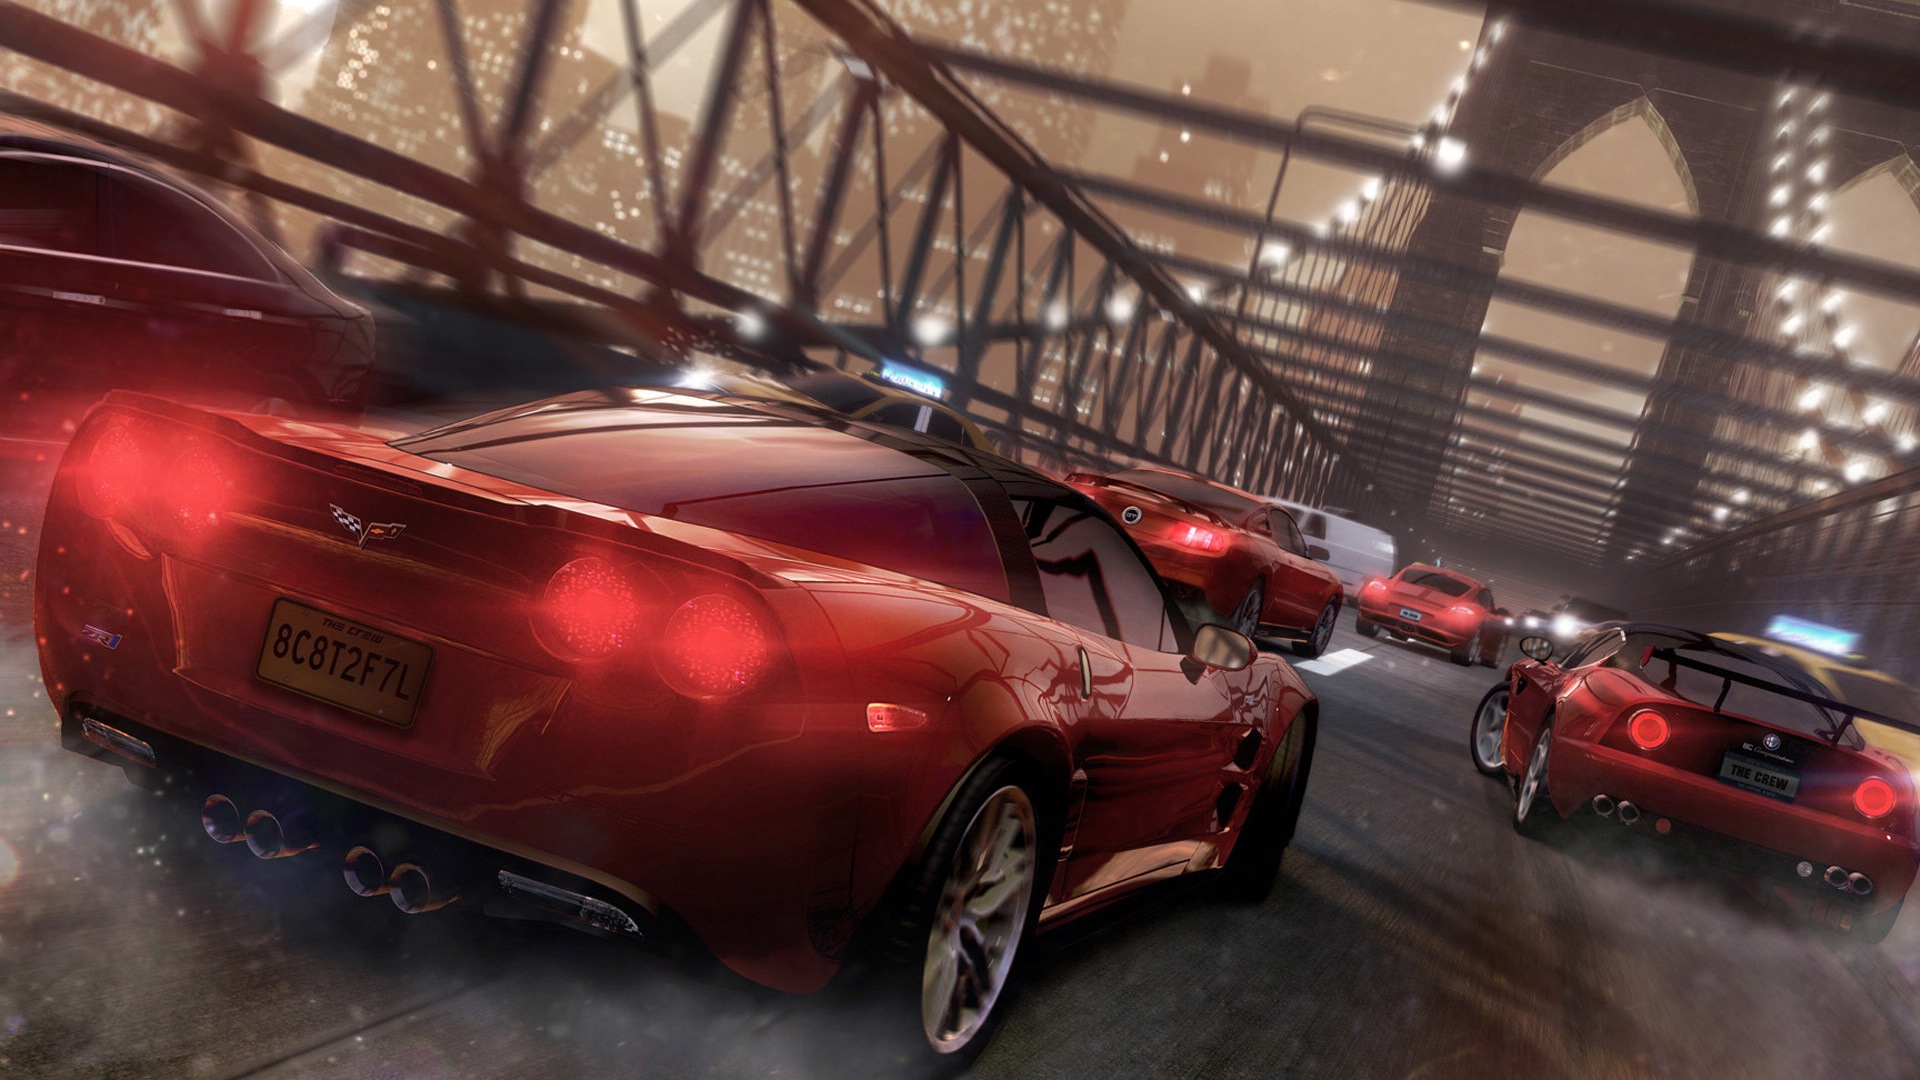 The Crew game HD wallpapers #15 - 1920x1080